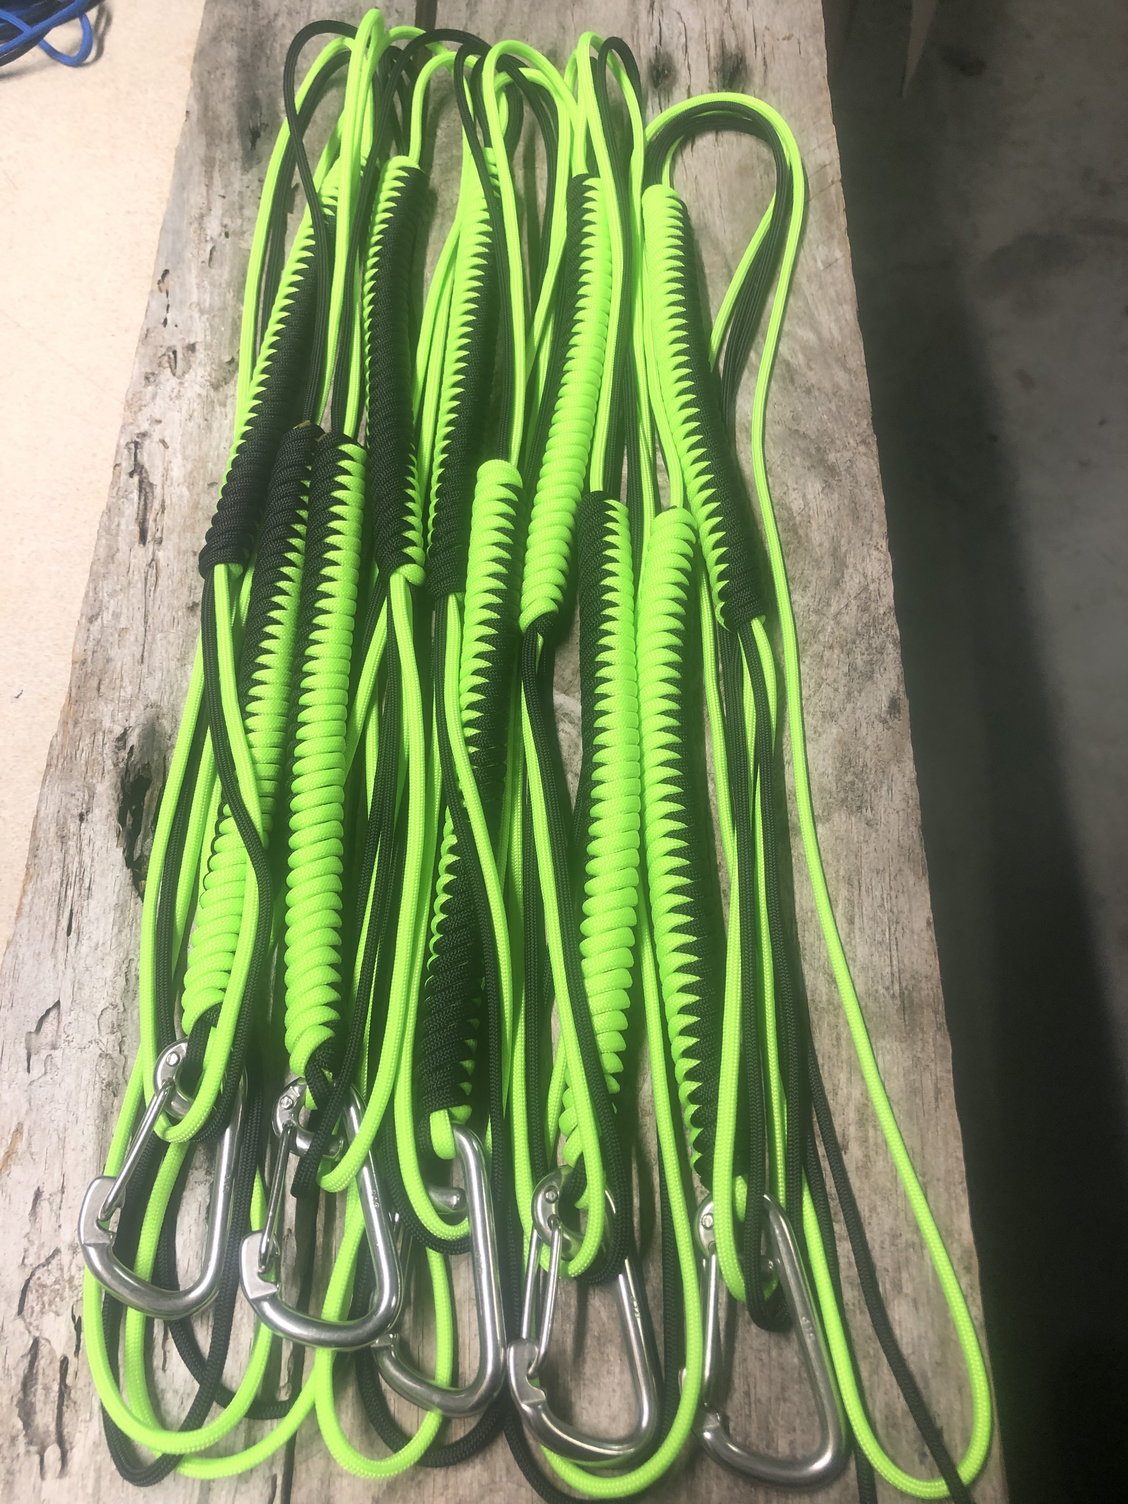 Rod Leashes.Super Stretch!! - The Hull Truth - Boating and Fishing Forum